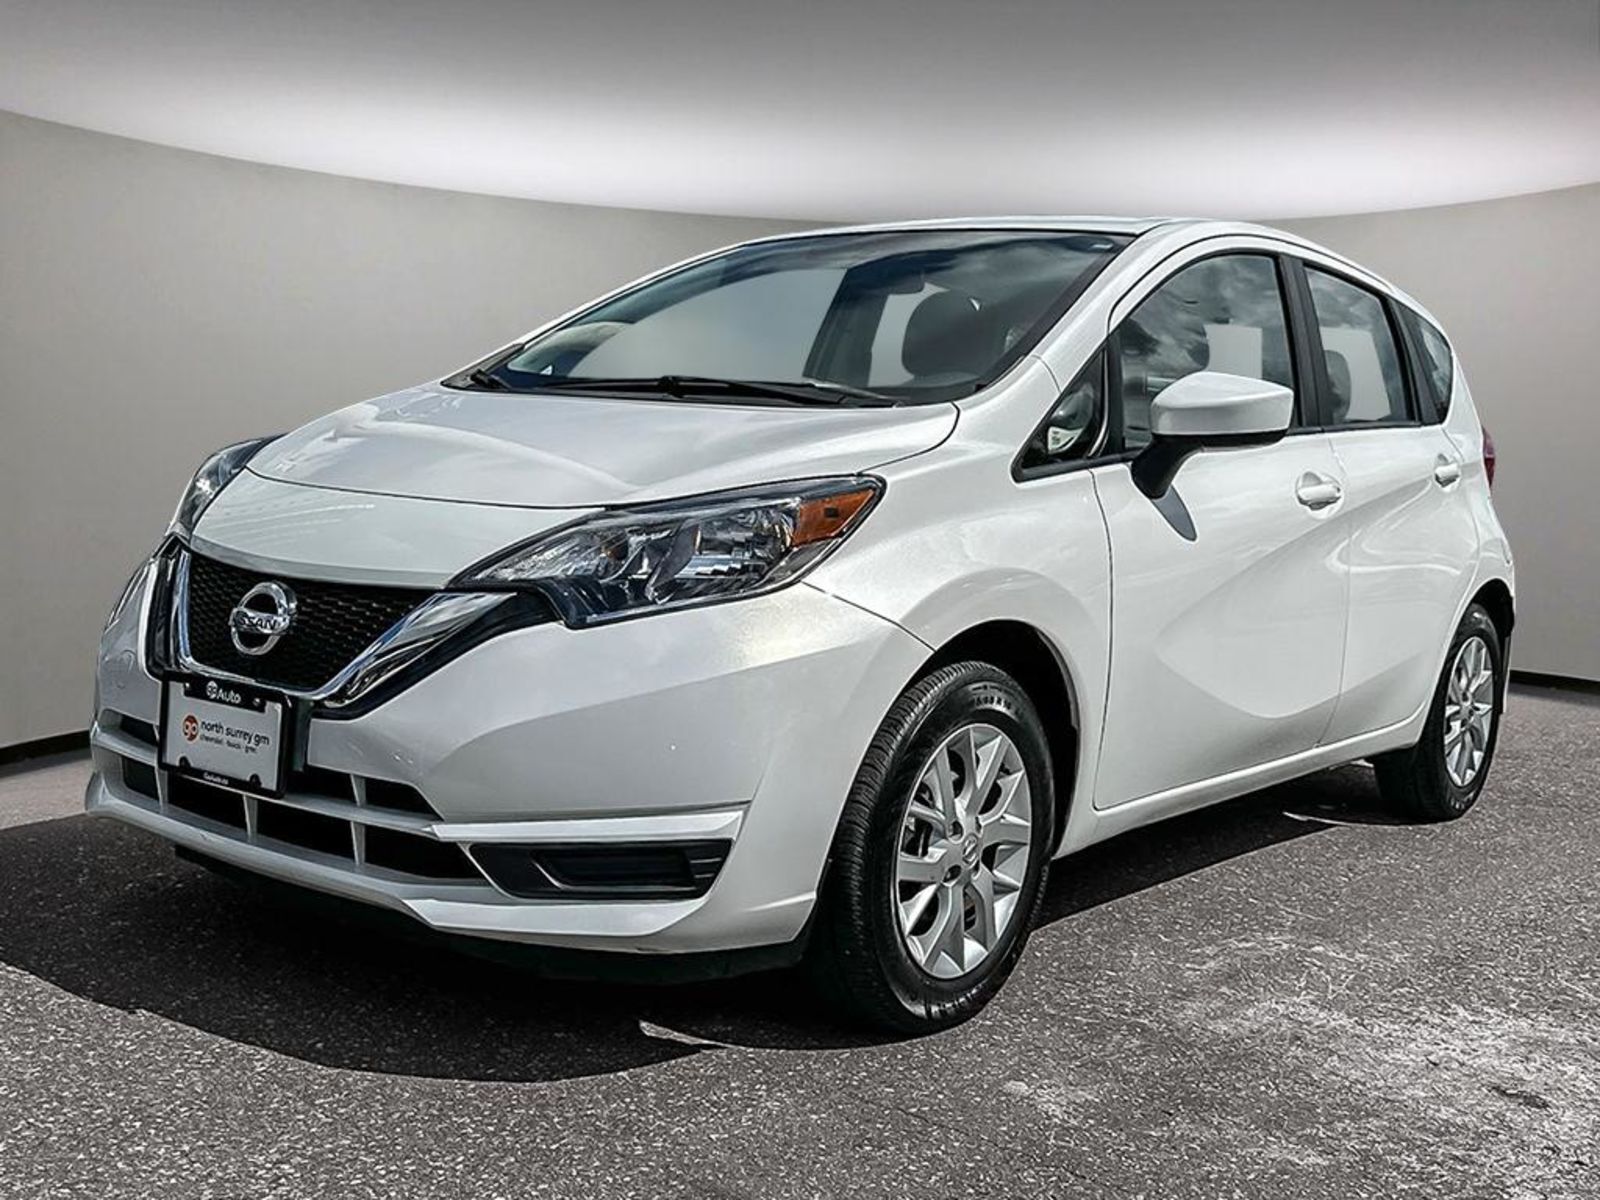 2018 Nissan Versa Note S - Low Kms / SXM / Rear View Cam / No Extra Fees